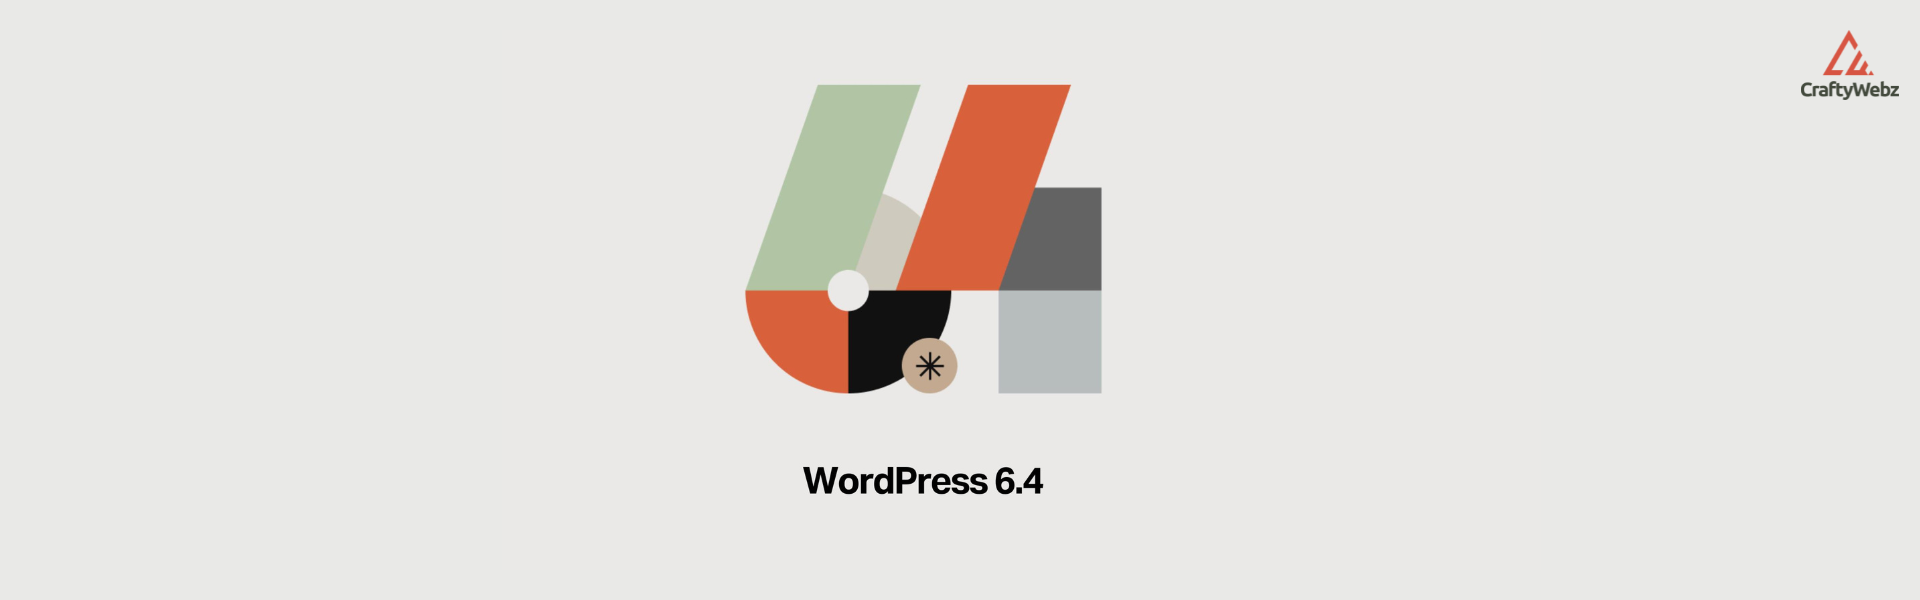 WordPress 6.4: Best New Features With The Latest Version